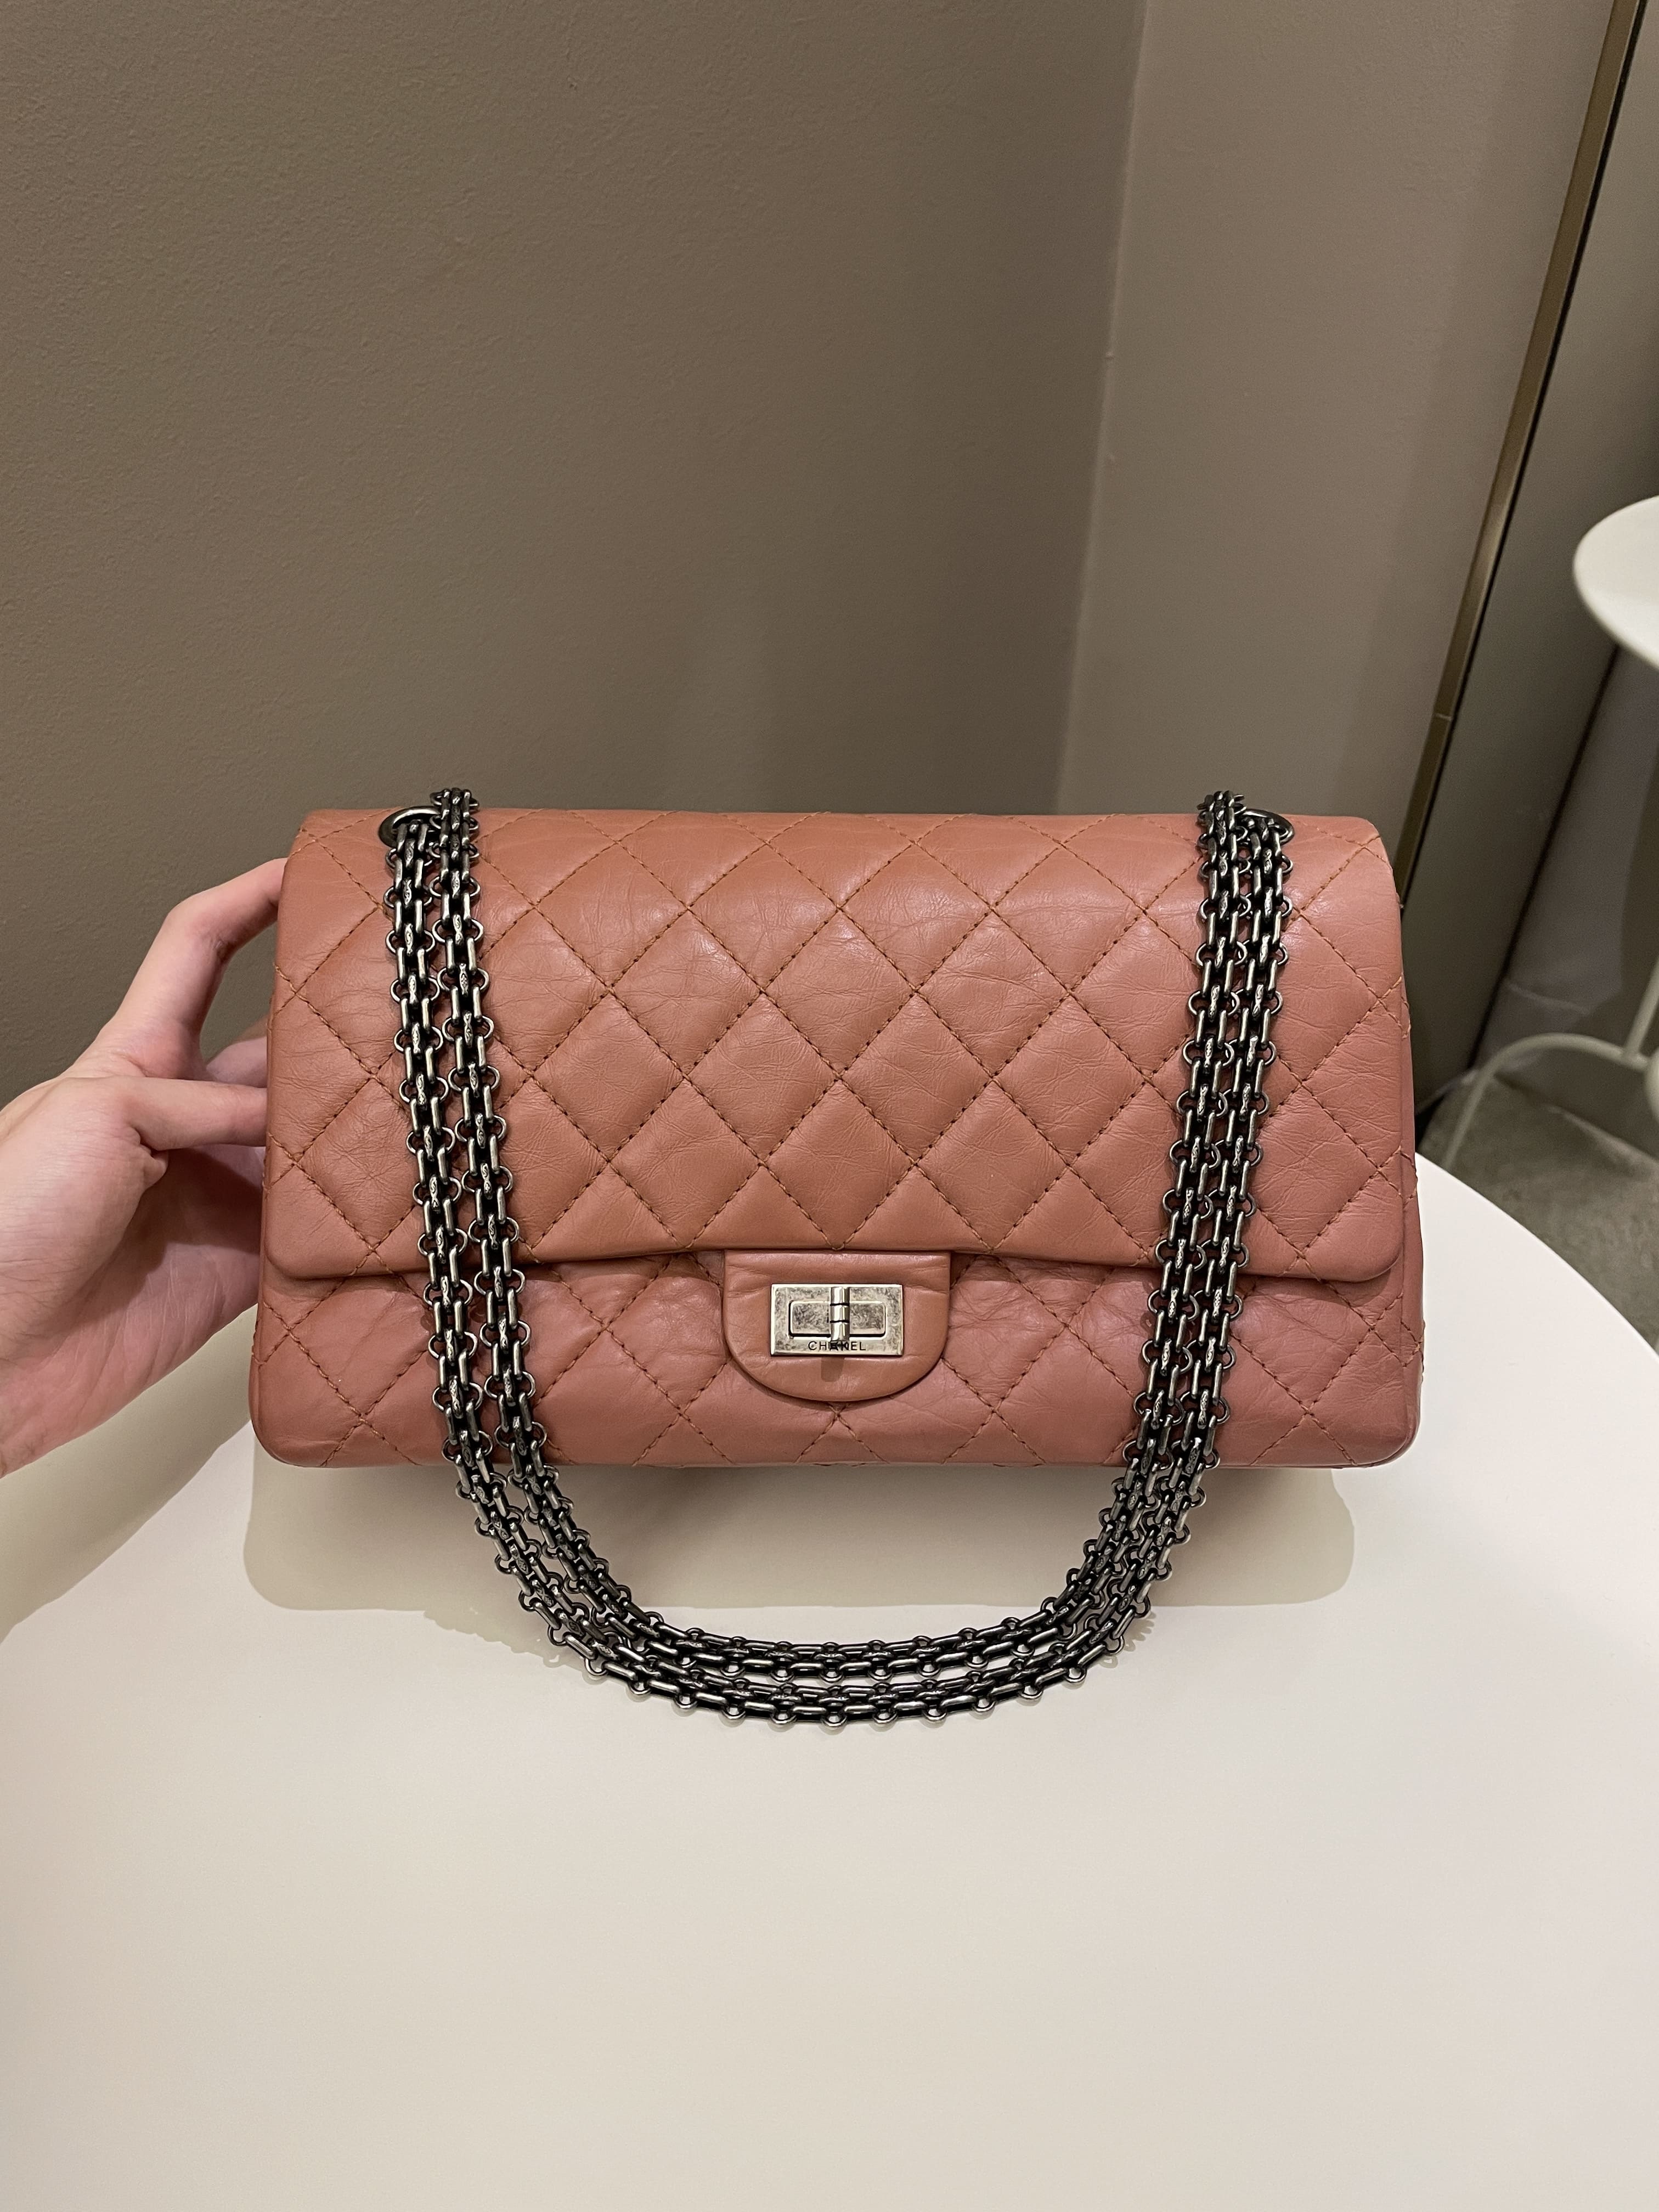 Chanel 2.55 226 Quilted Reissue Double Flap Brick Aged Calfskin